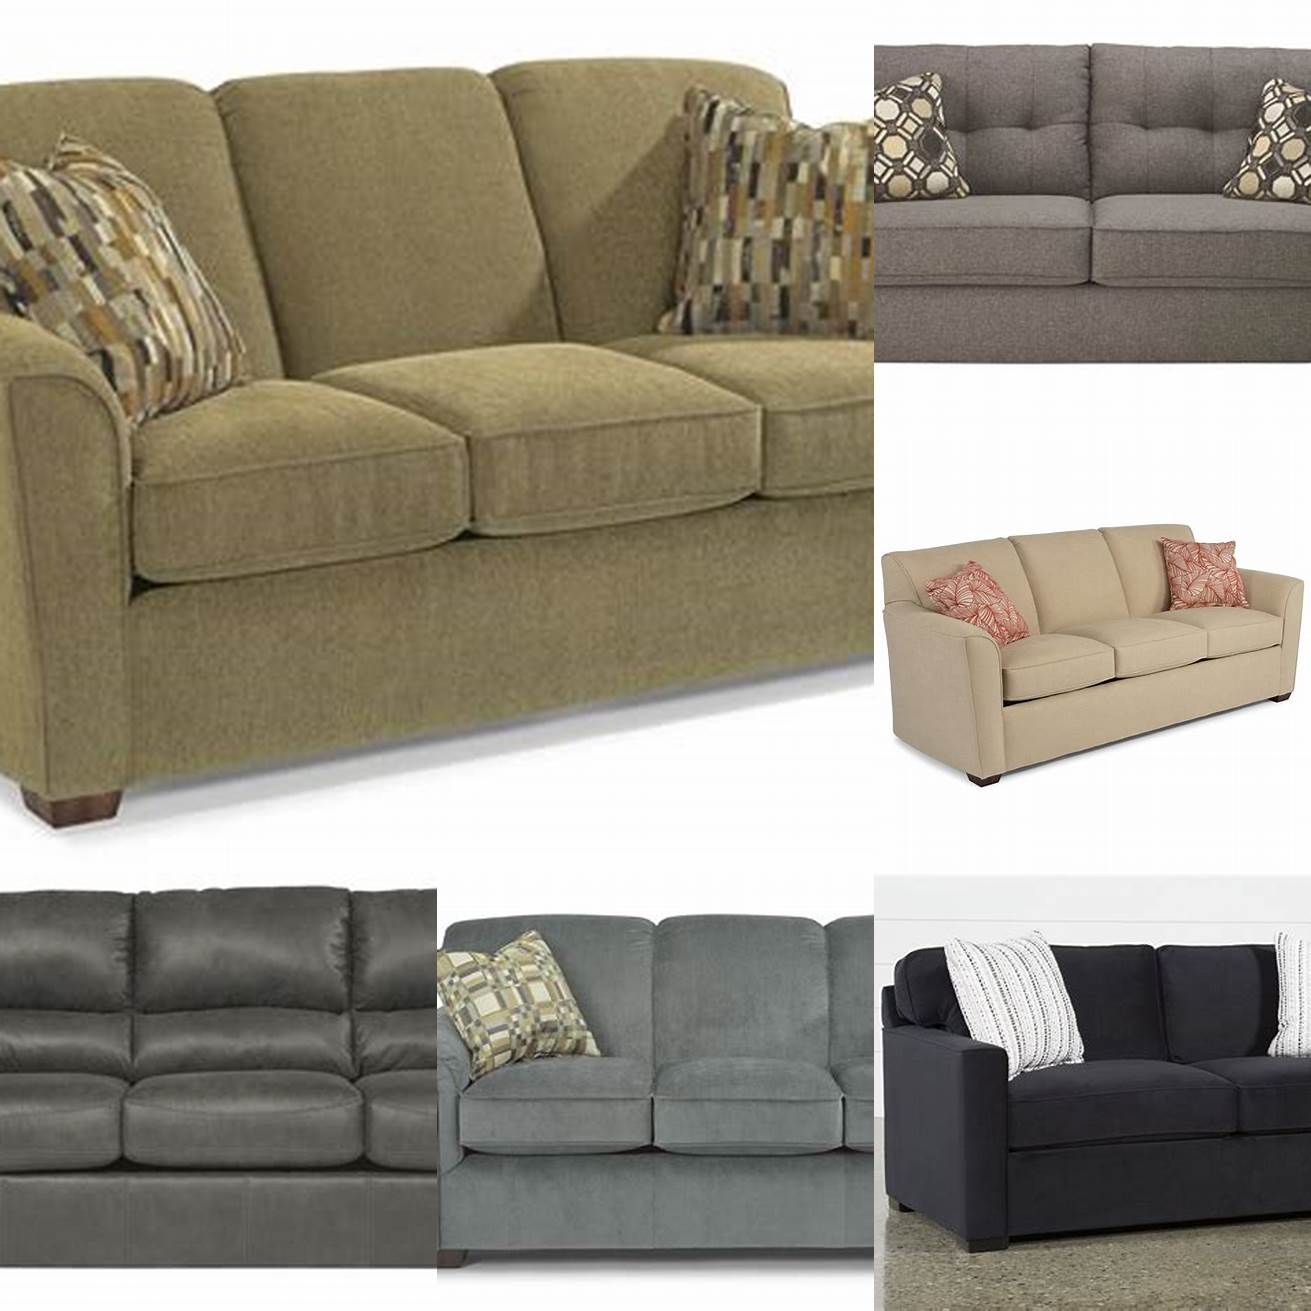 Price Full Sleeper Sofas come in different price ranges